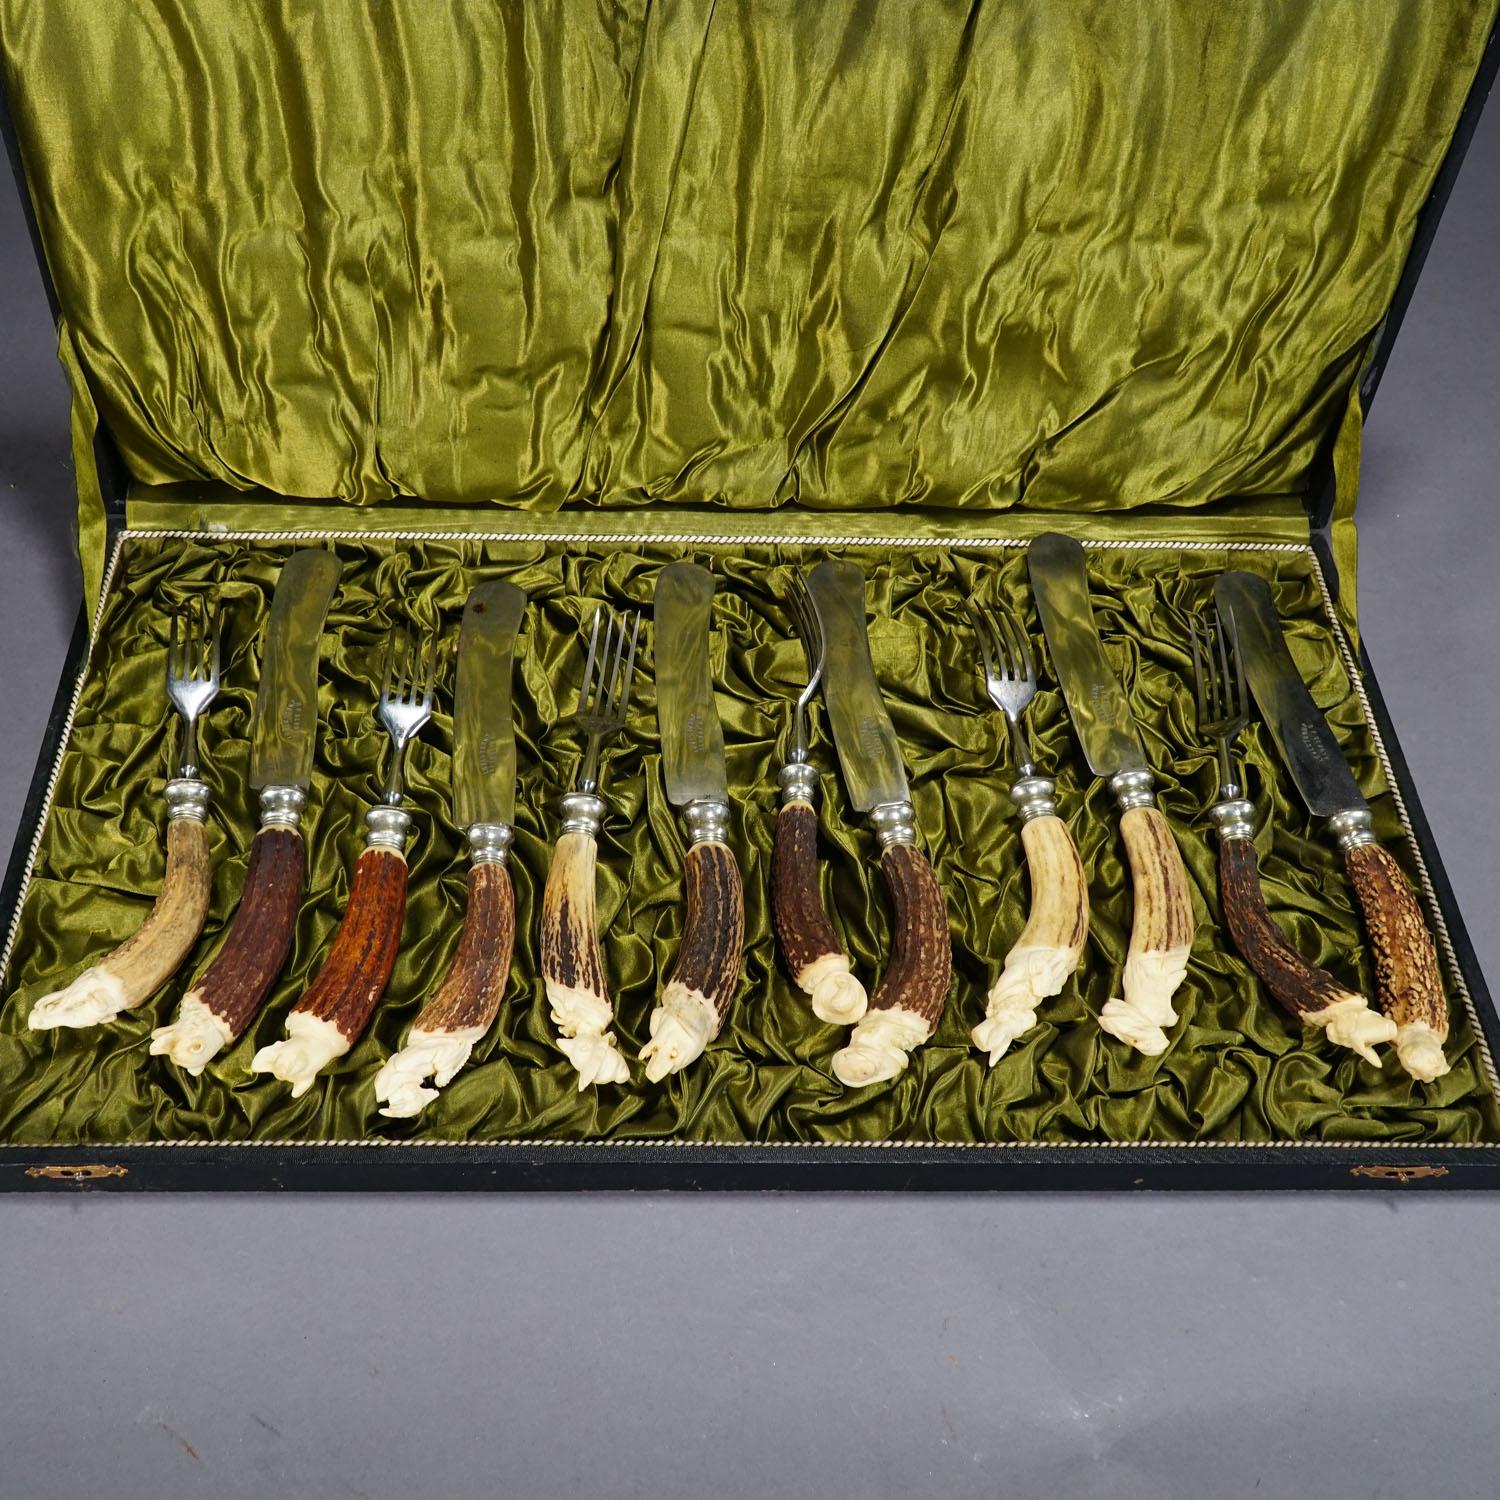 A rare antique set of 6 knives and 6 forkes in a lidded box. The handles are made of deer Horn with hand carved animal sculptures on their end. There are hare, fox, bear, dog, wolf, cock, etc. the animals are carved after caracters of the fables of